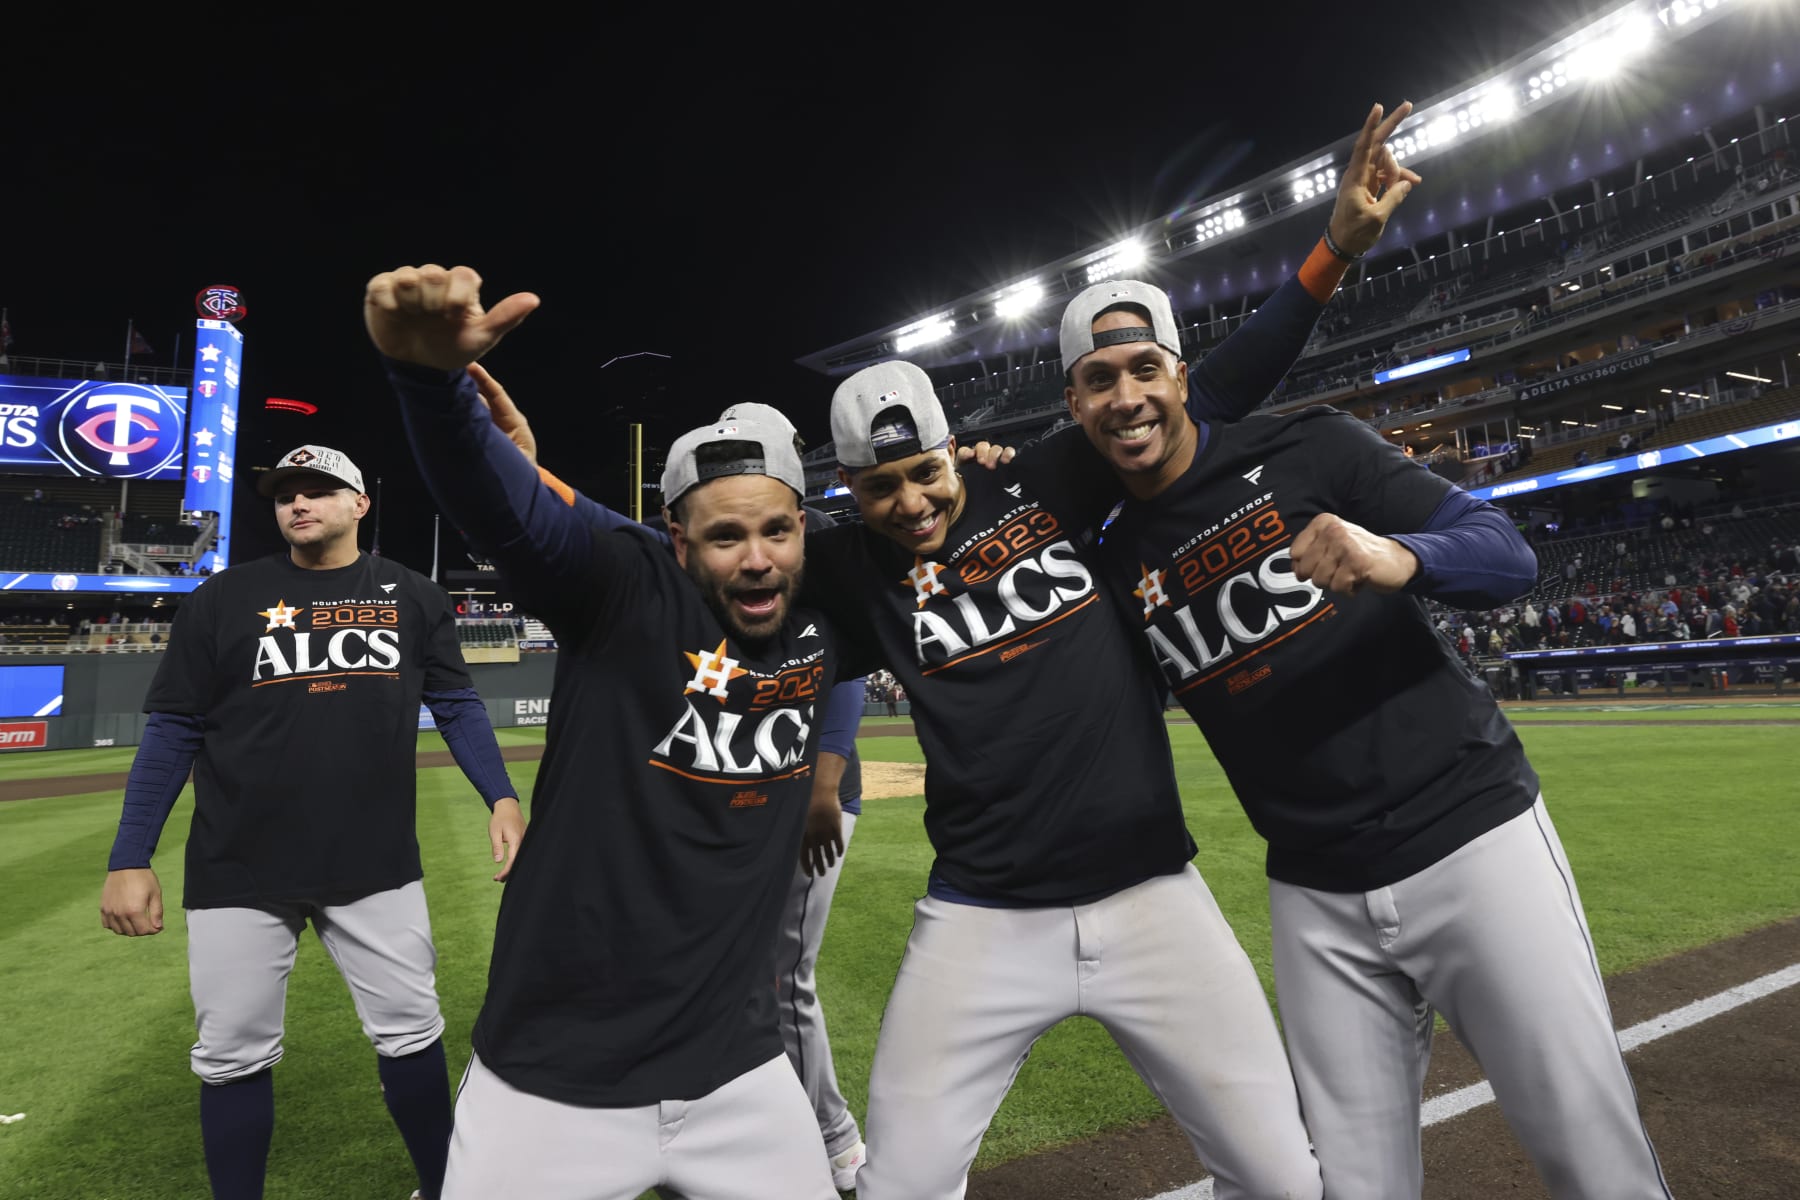 Houston Astros News, Videos, Schedule, Roster, Stats - Yahoo Sports